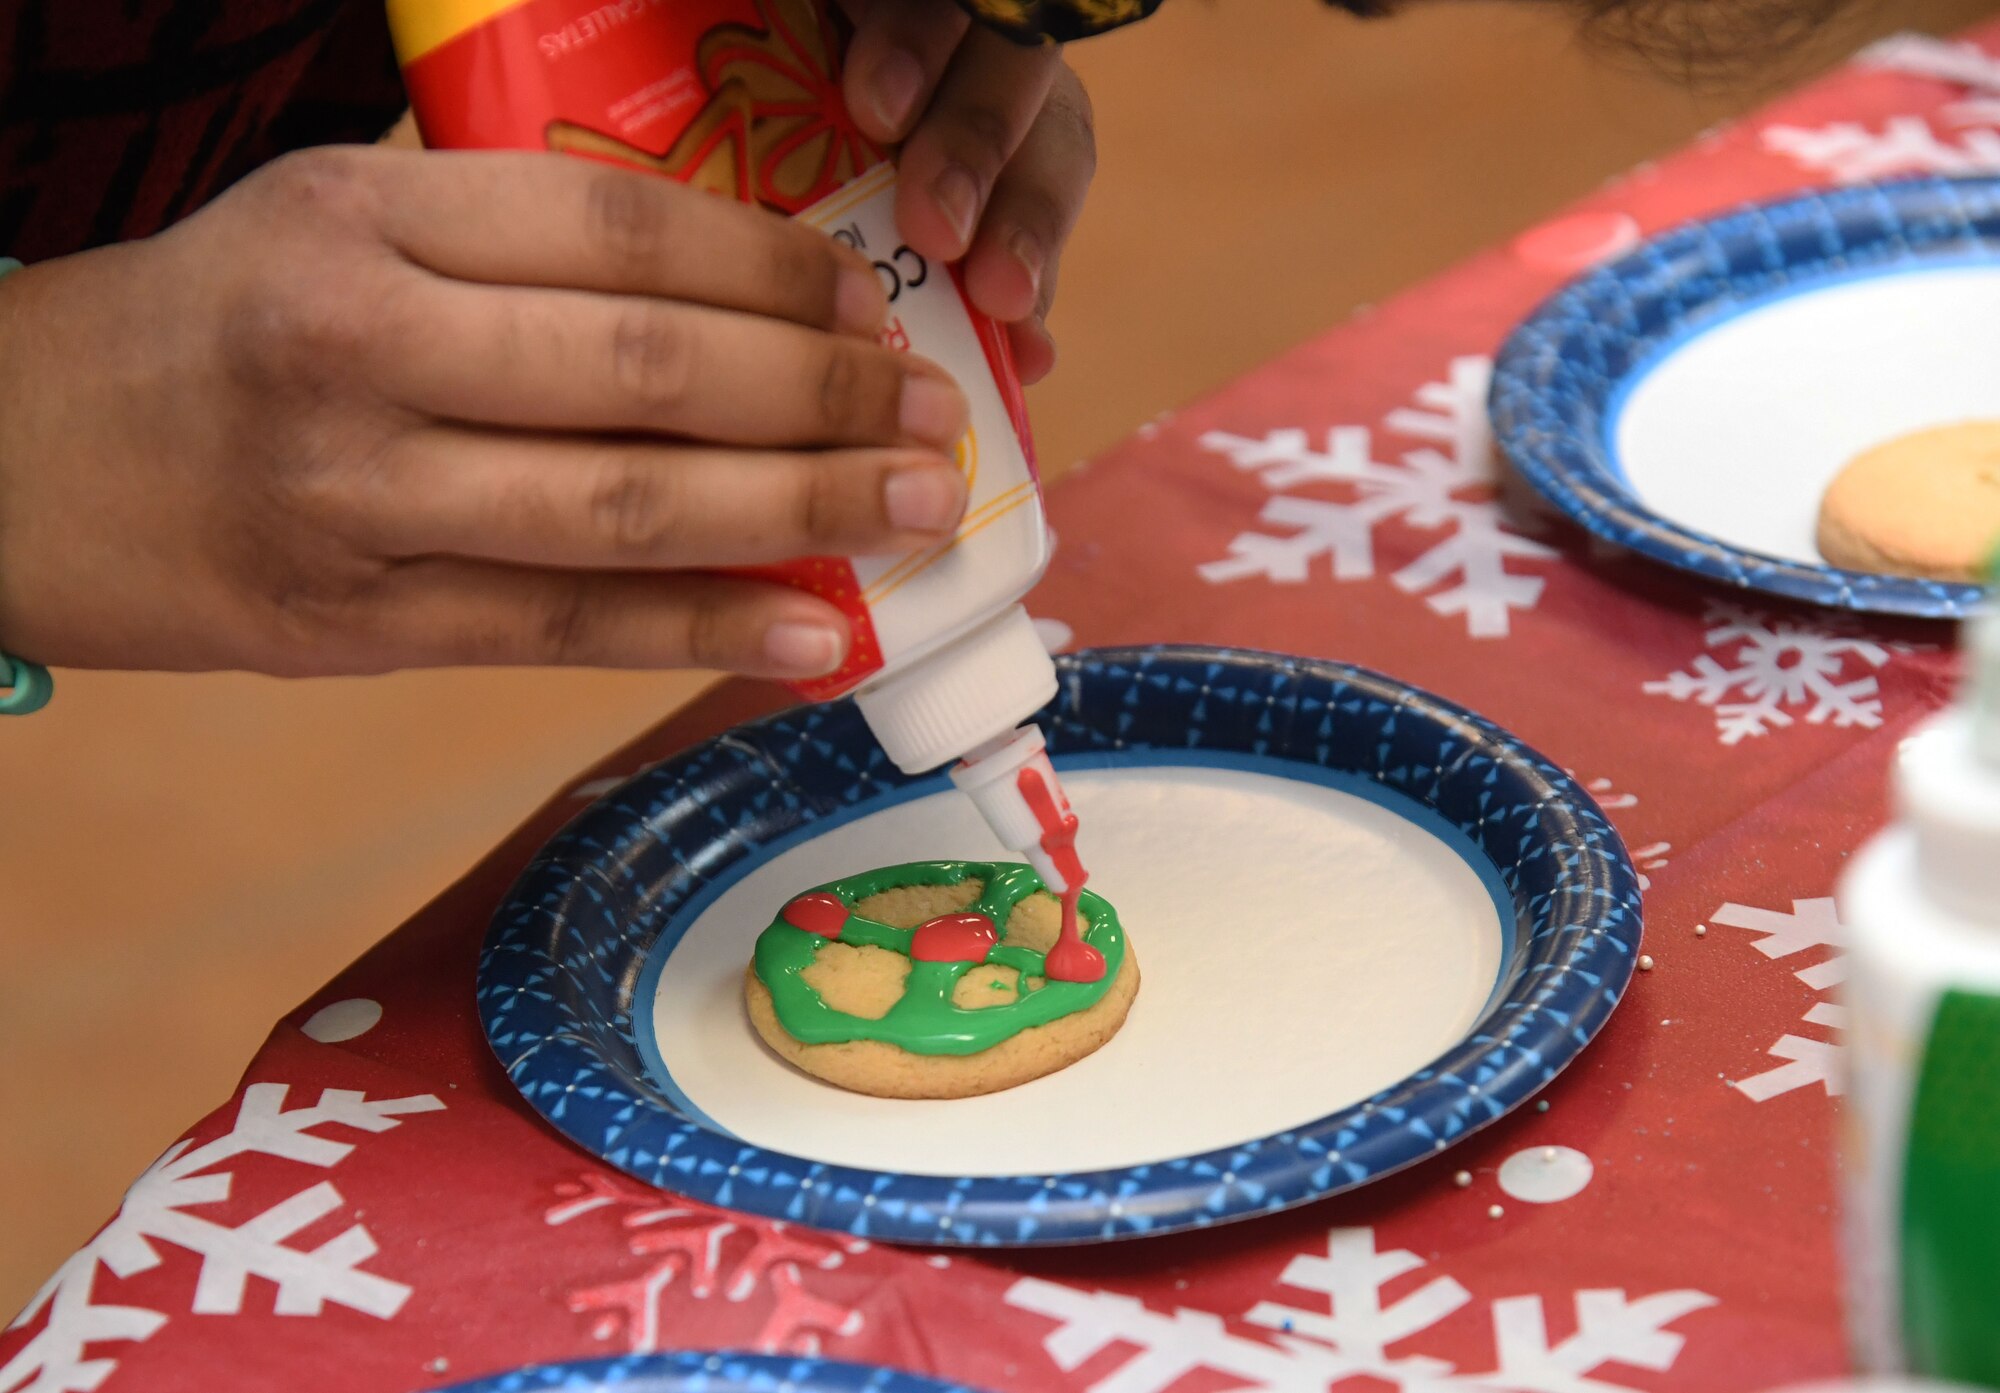 Aasiya Akbar, daughter of U.S. Navy Lt. Mohammed Akbar, Naval Construction Group TWO civil engineer, Naval Construction Battalion Center, Gulfport, Mississippi, decorates a cookie during the 2021 Winter Fest at the marina park on Keesler Air Force Base, Mississippi, Dec. 3, 2021. The event, which included a visit with Santa and a tree lighting ceremony, was held in celebration of the holiday season. (U.S. Air Force photo by Kemberly Groue)